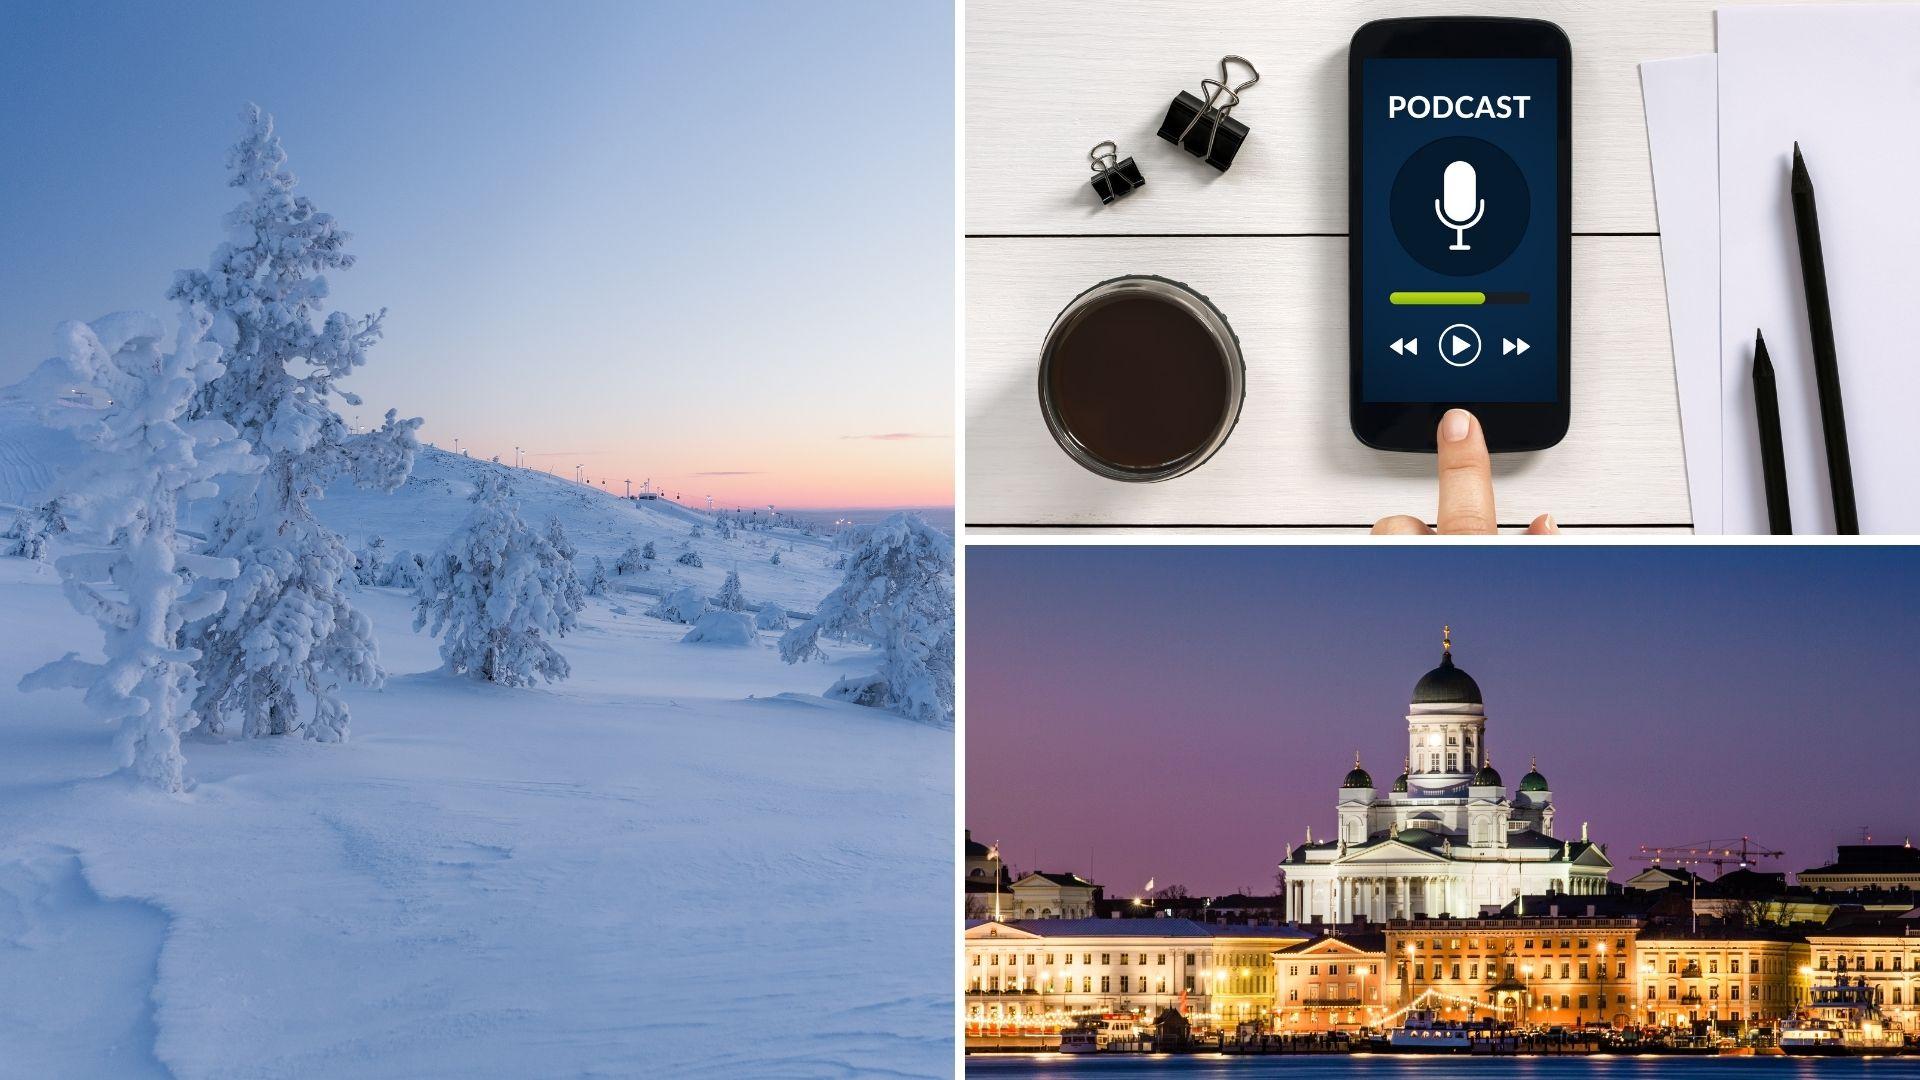 Podcasts about Finland, Youtube videos about Finnish culture